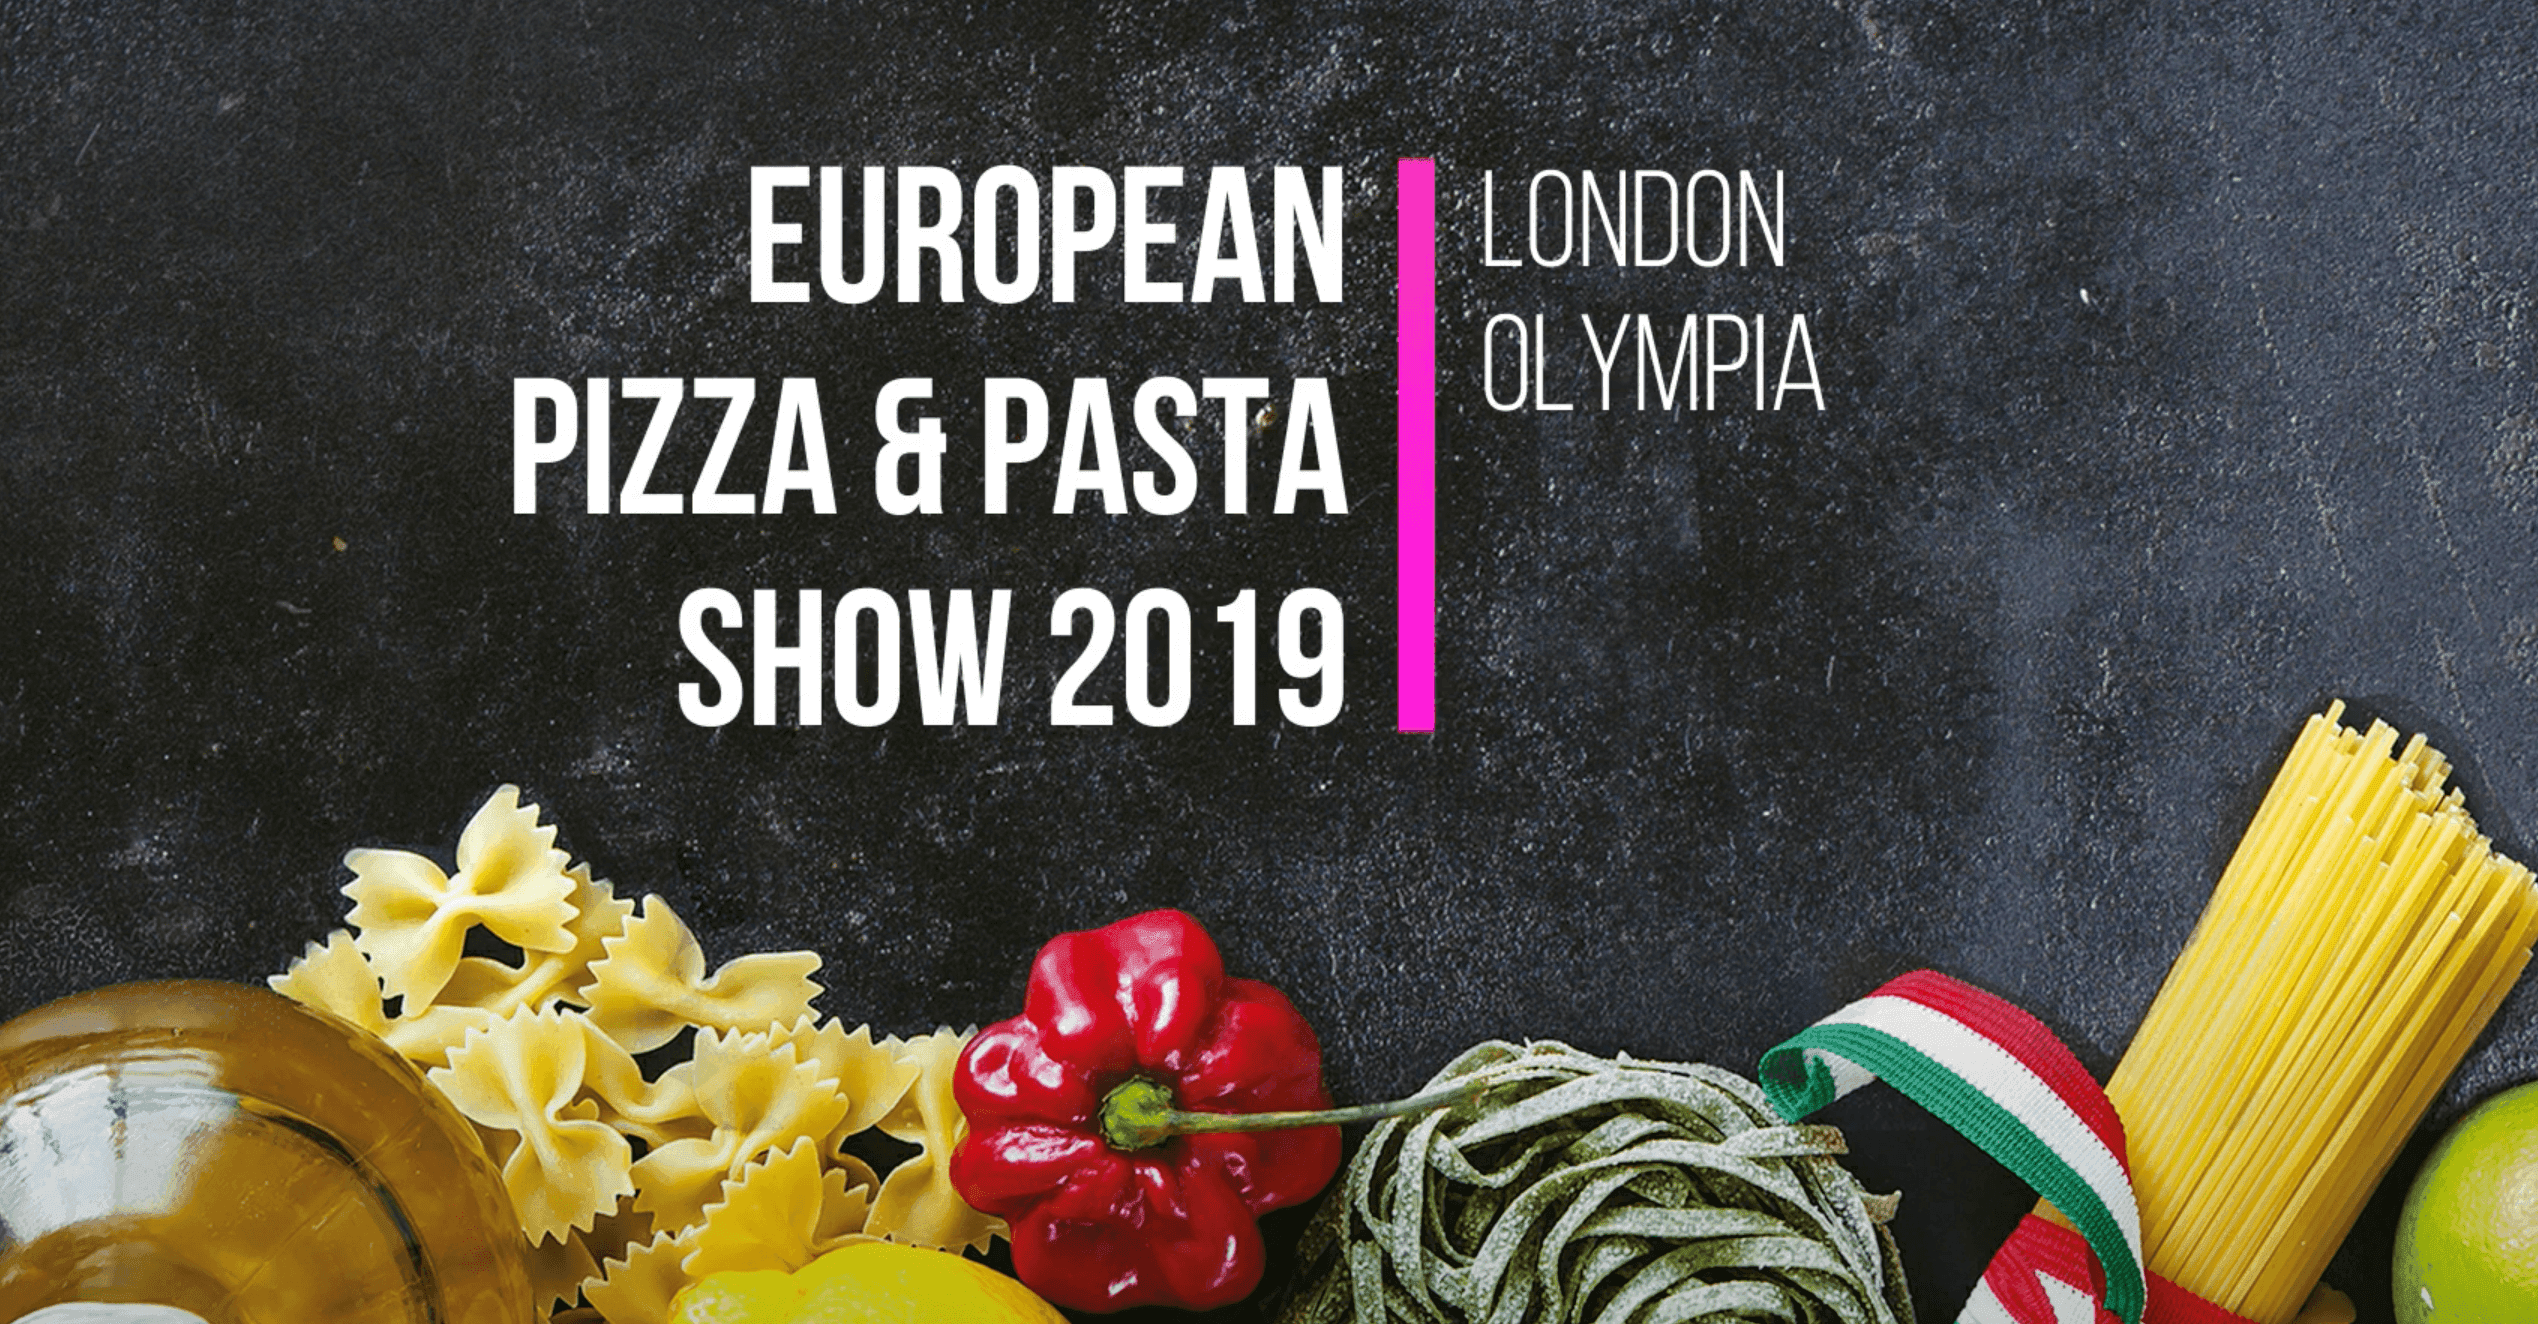 european pizza and pasta show 2019 in london and olympia promotion video 